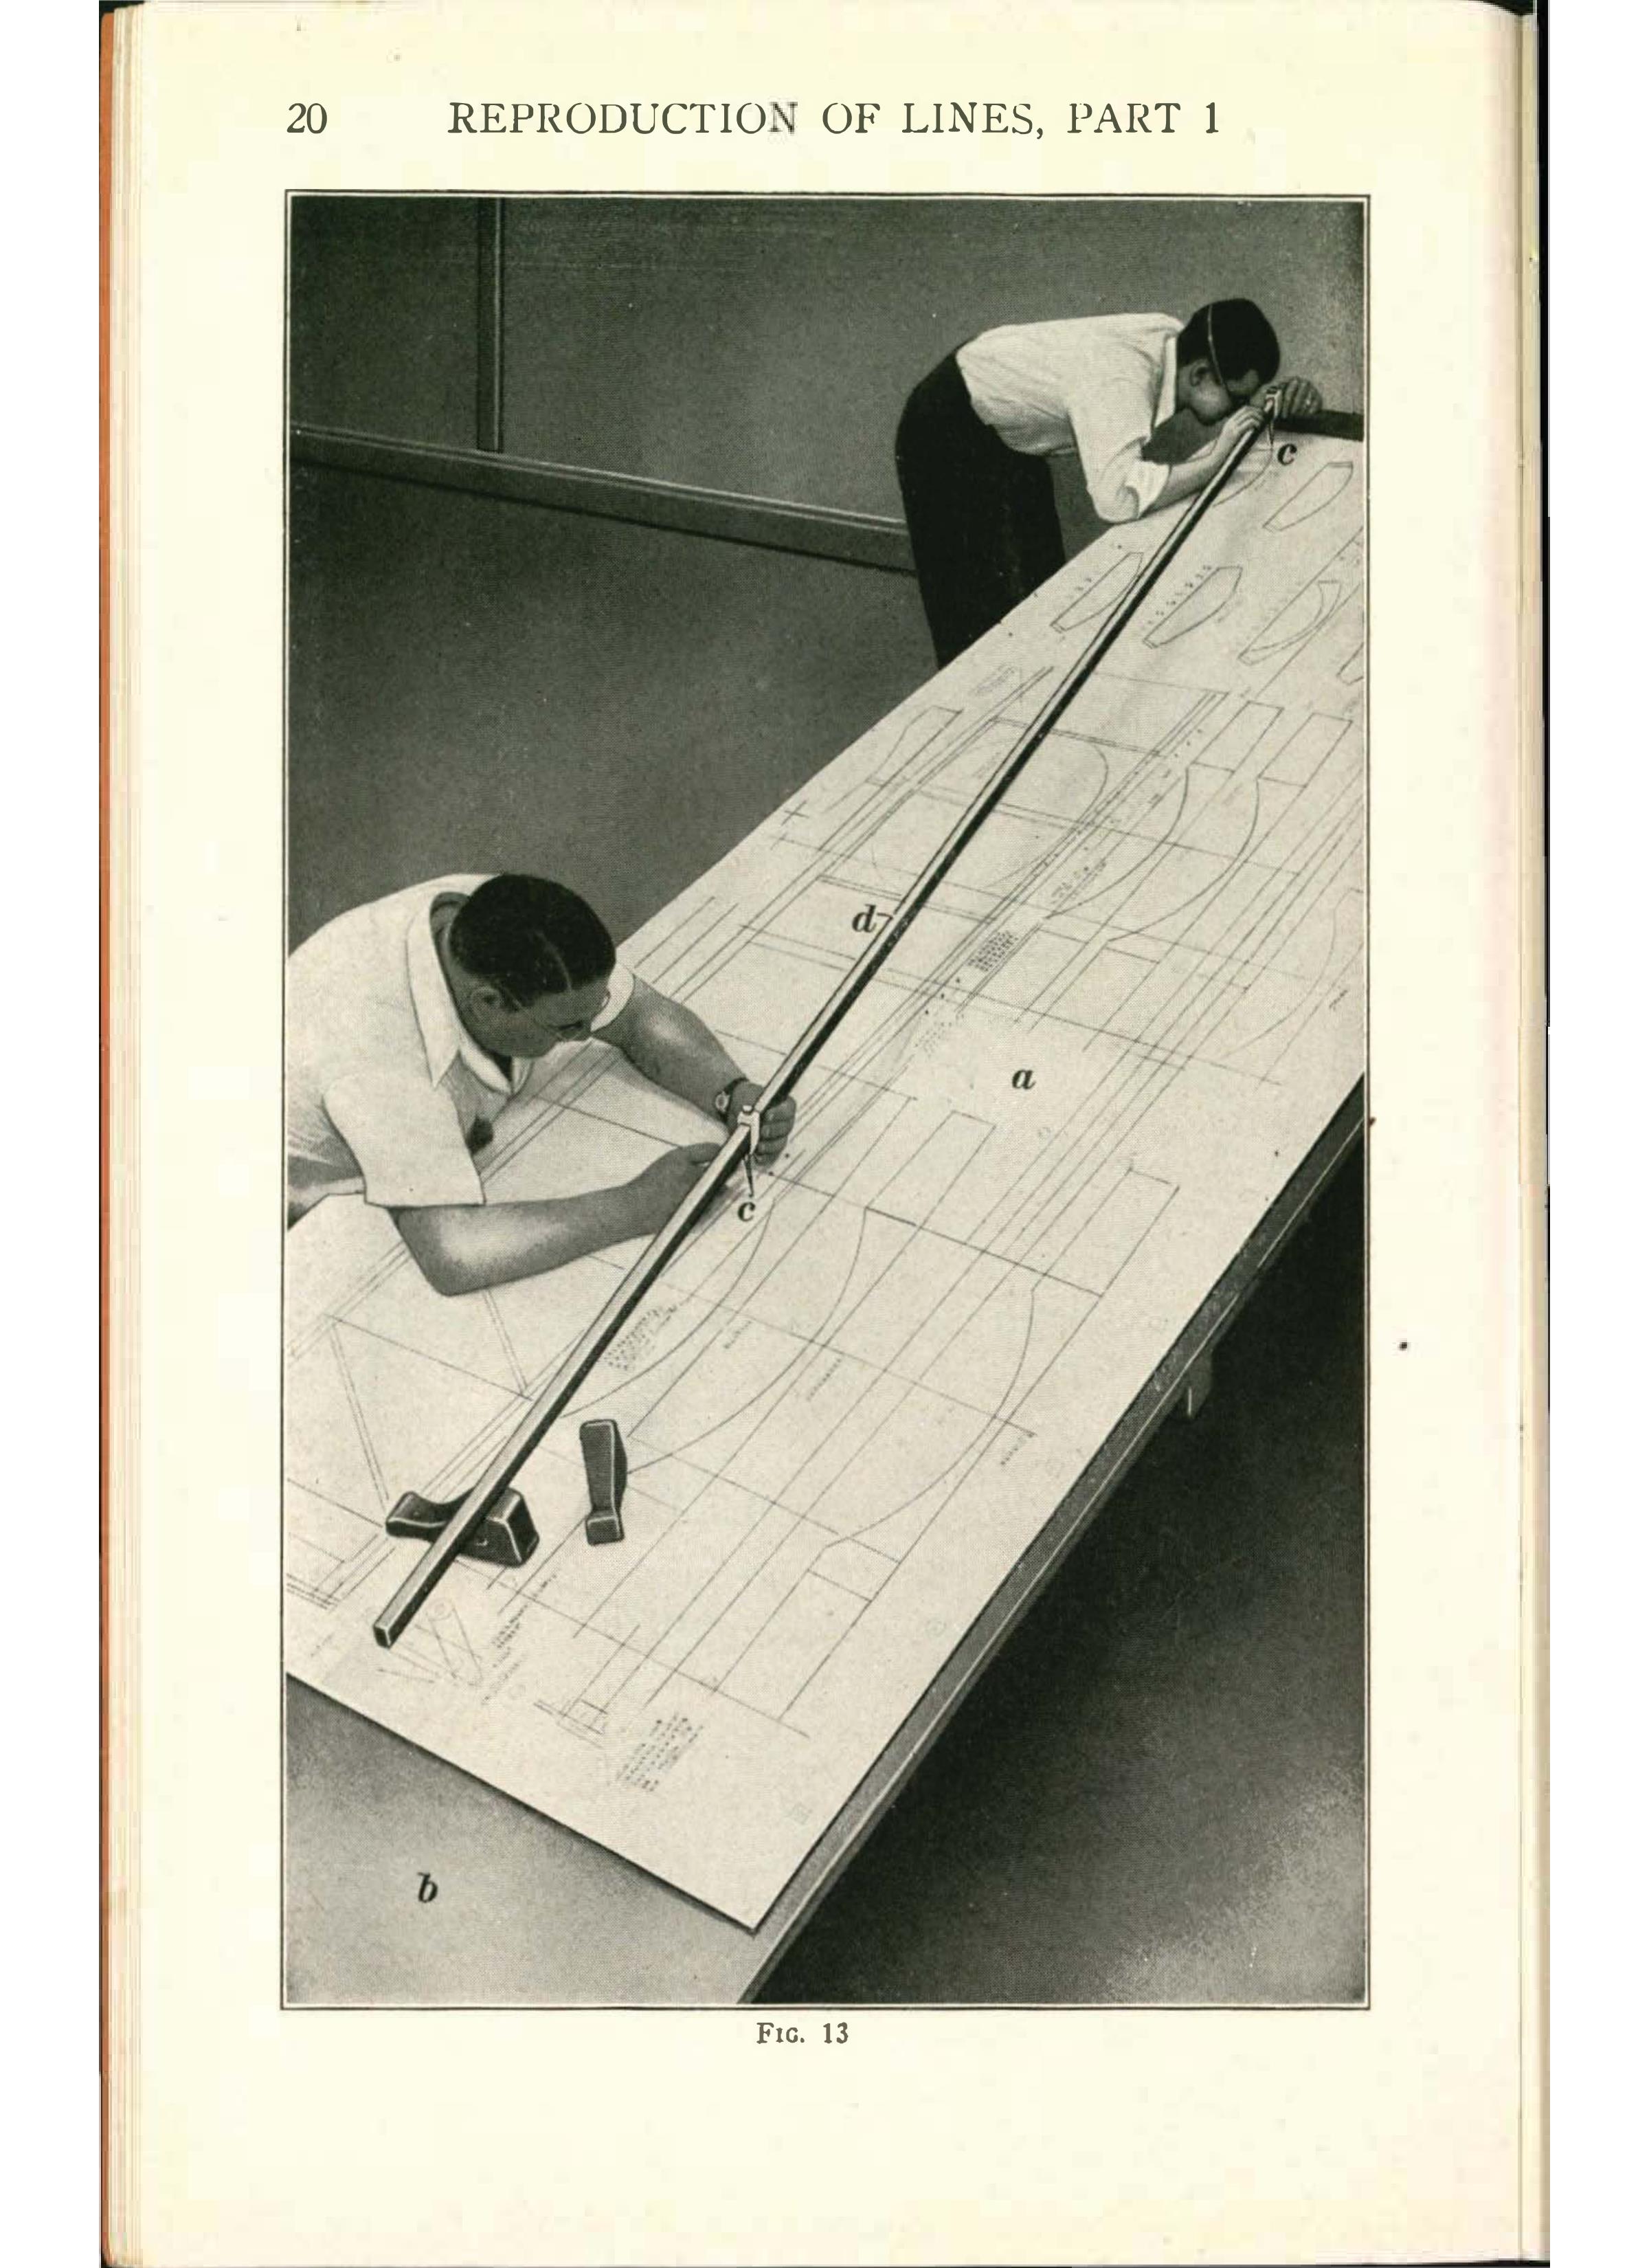 Sample page 22 from AirCorps Library document: Templets and Layout - Reproduction of Lines Part 1 - Bureau of Aeronautics